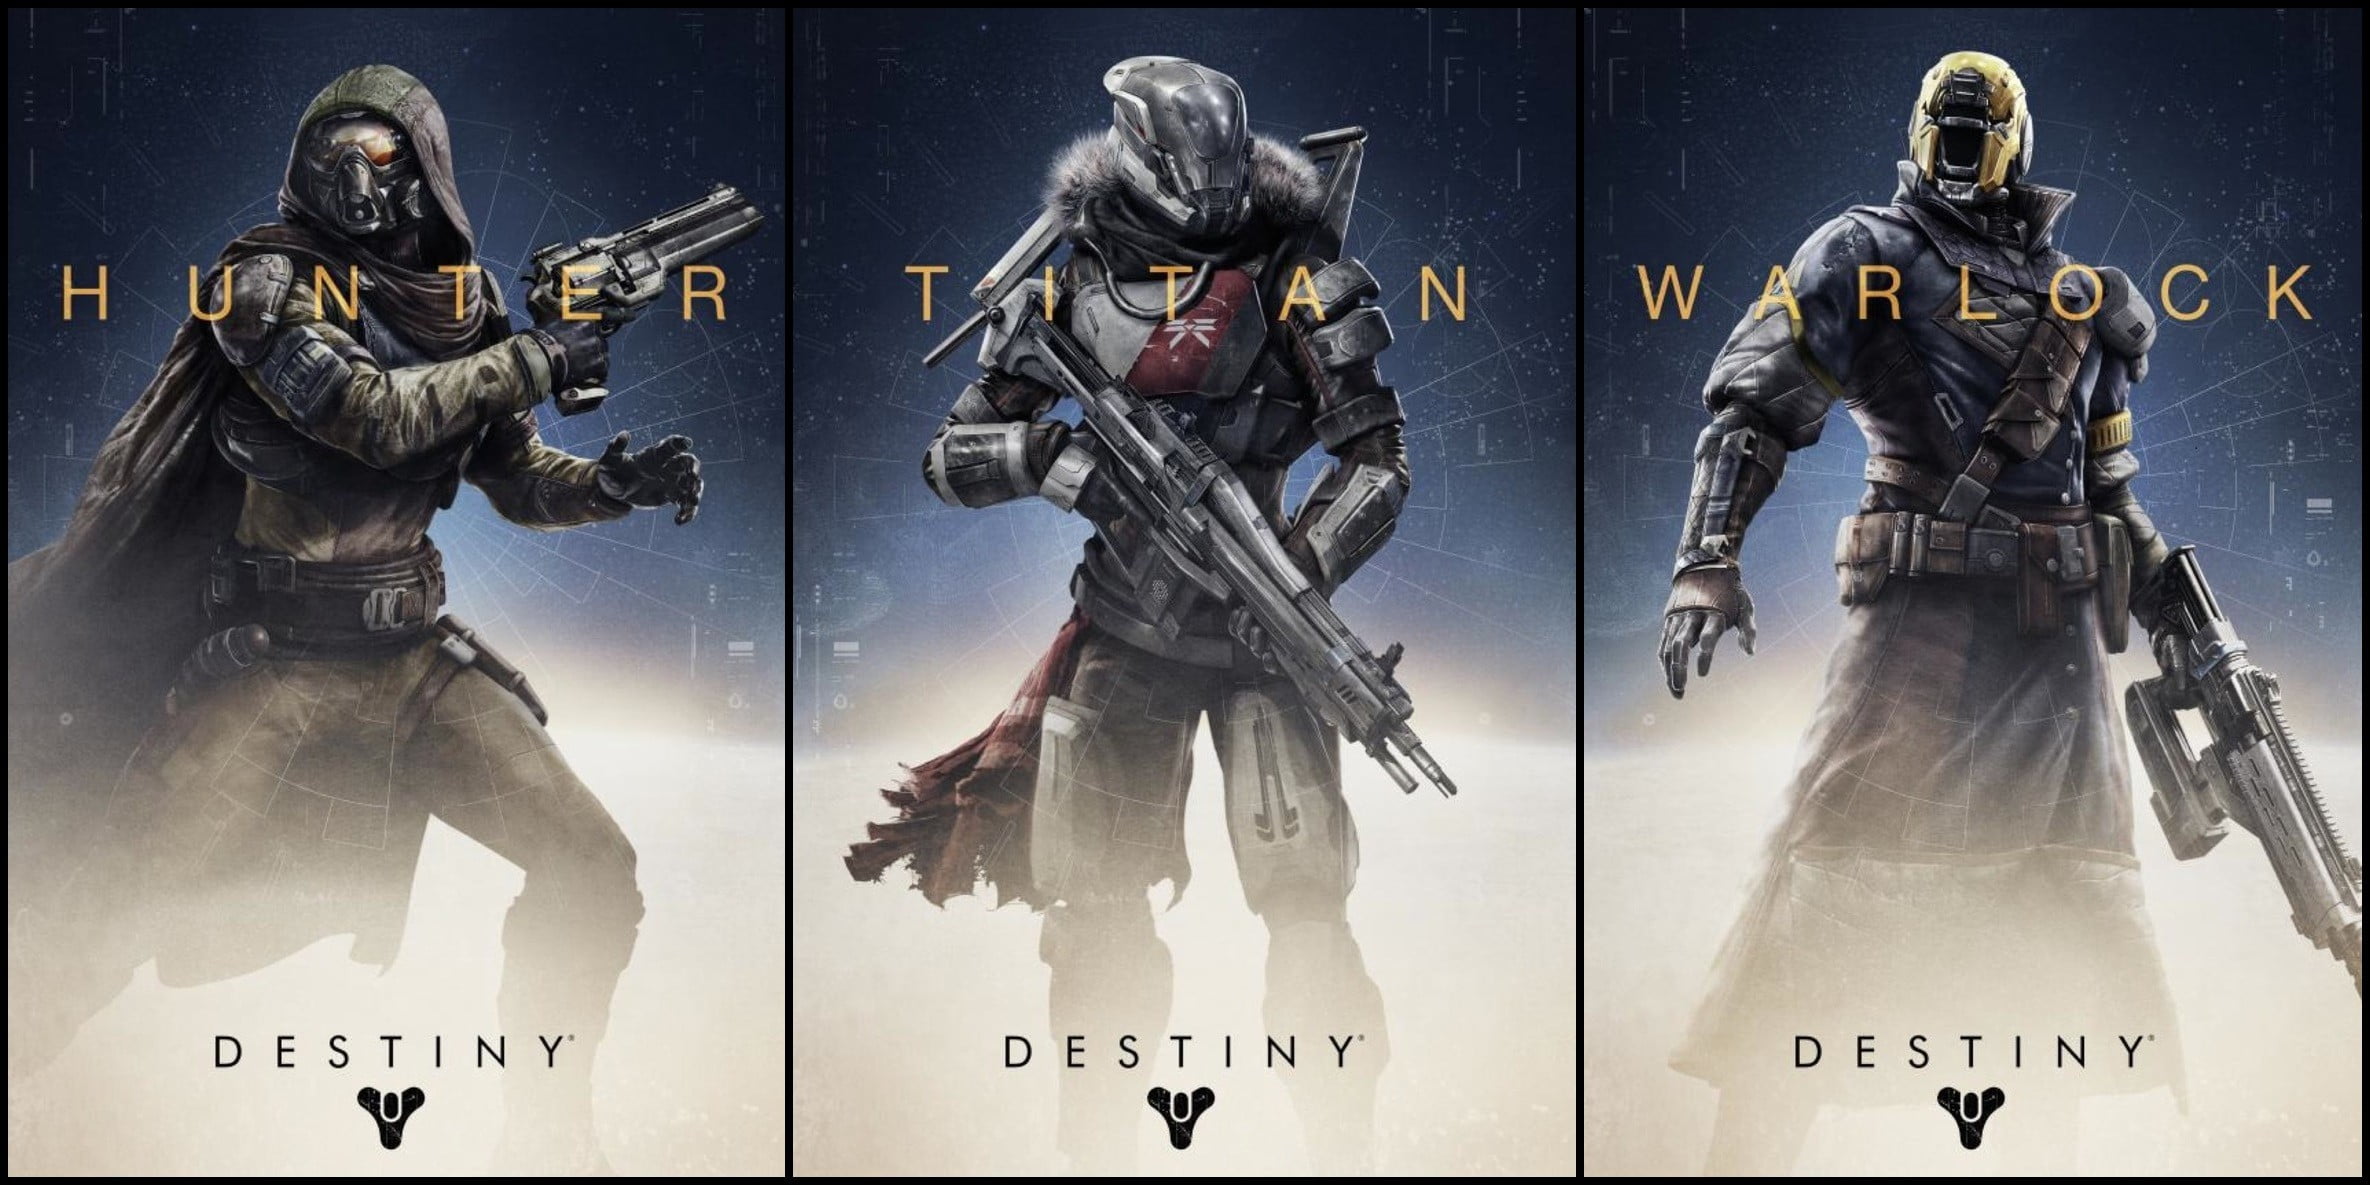 Destiny posters, Destiny (video game), weapon, armed Forces, war